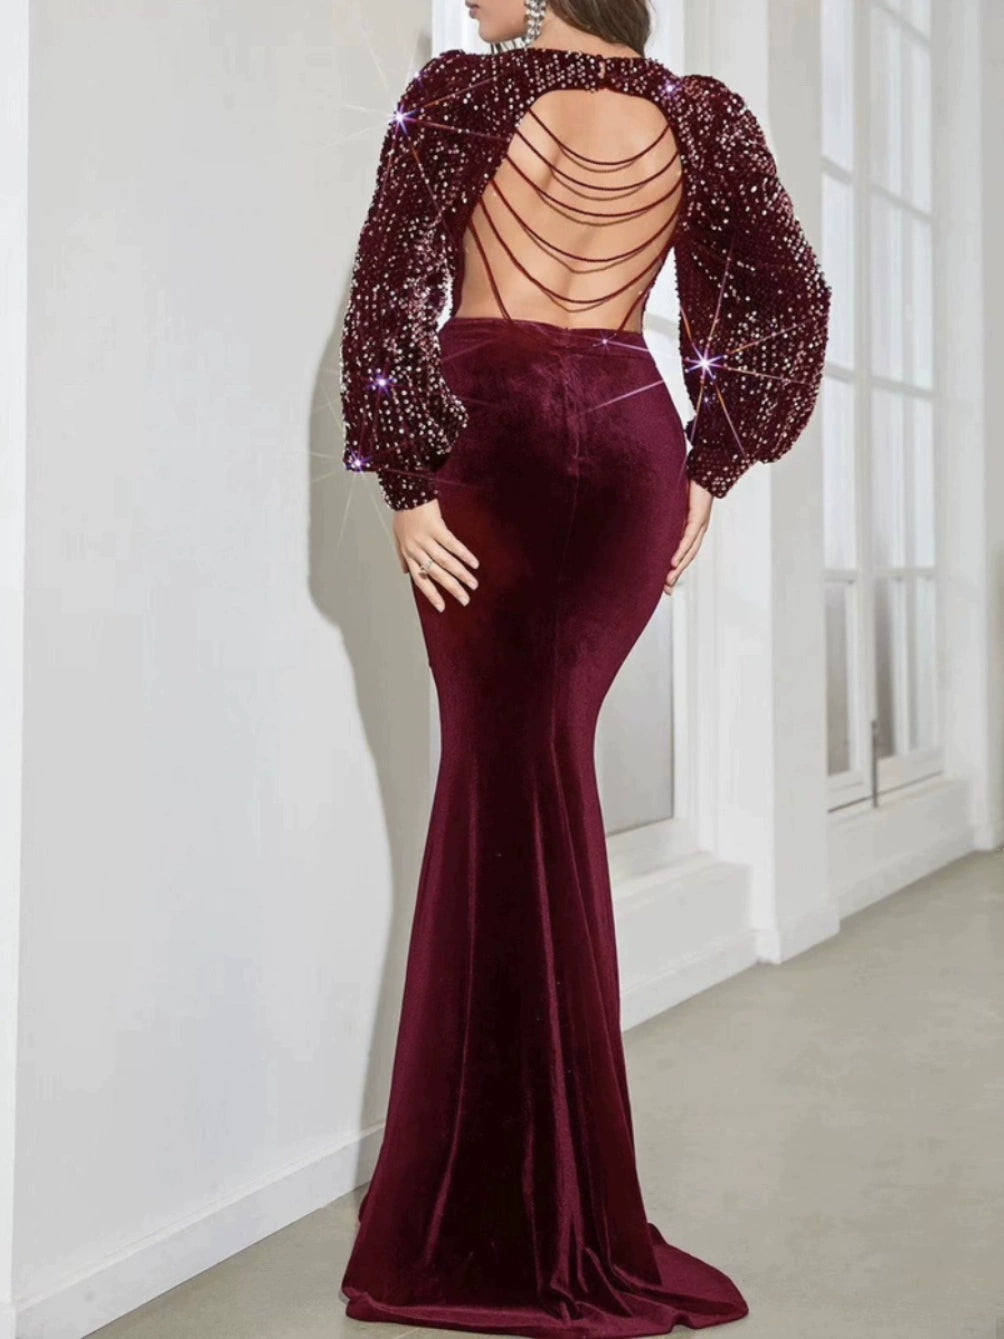 Sequin Elegance: Luxurious Banquet Dress for Glamorous Occasions